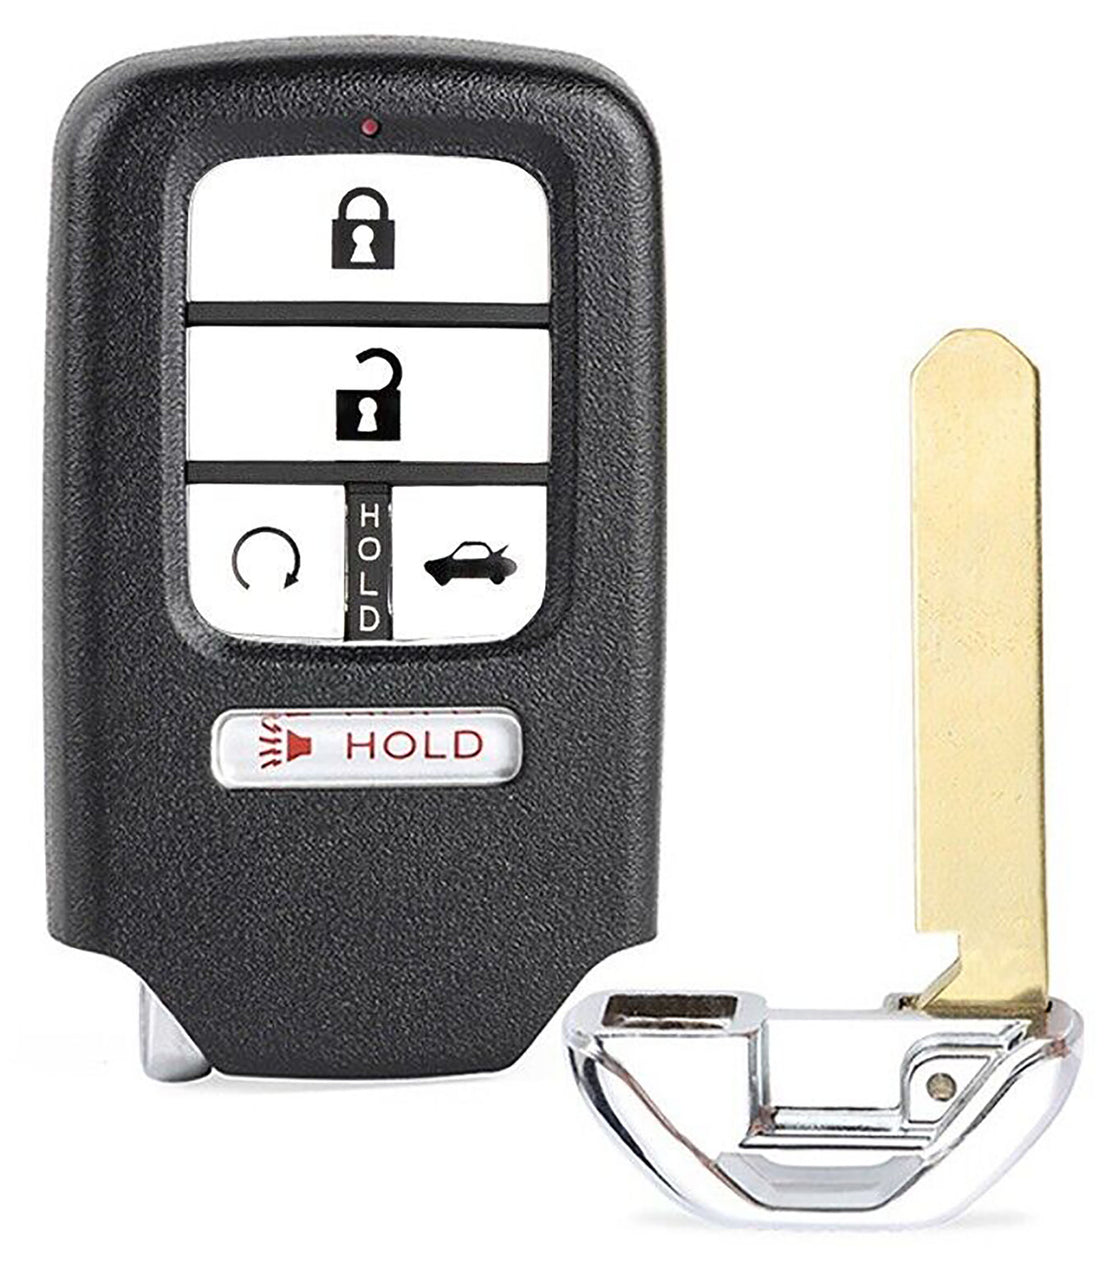 1x New Replacement Proximity Remote Key Fob Compatible with & Fit For Honda Vehicles KR5V2X V44 - MPN KR5V2X-06